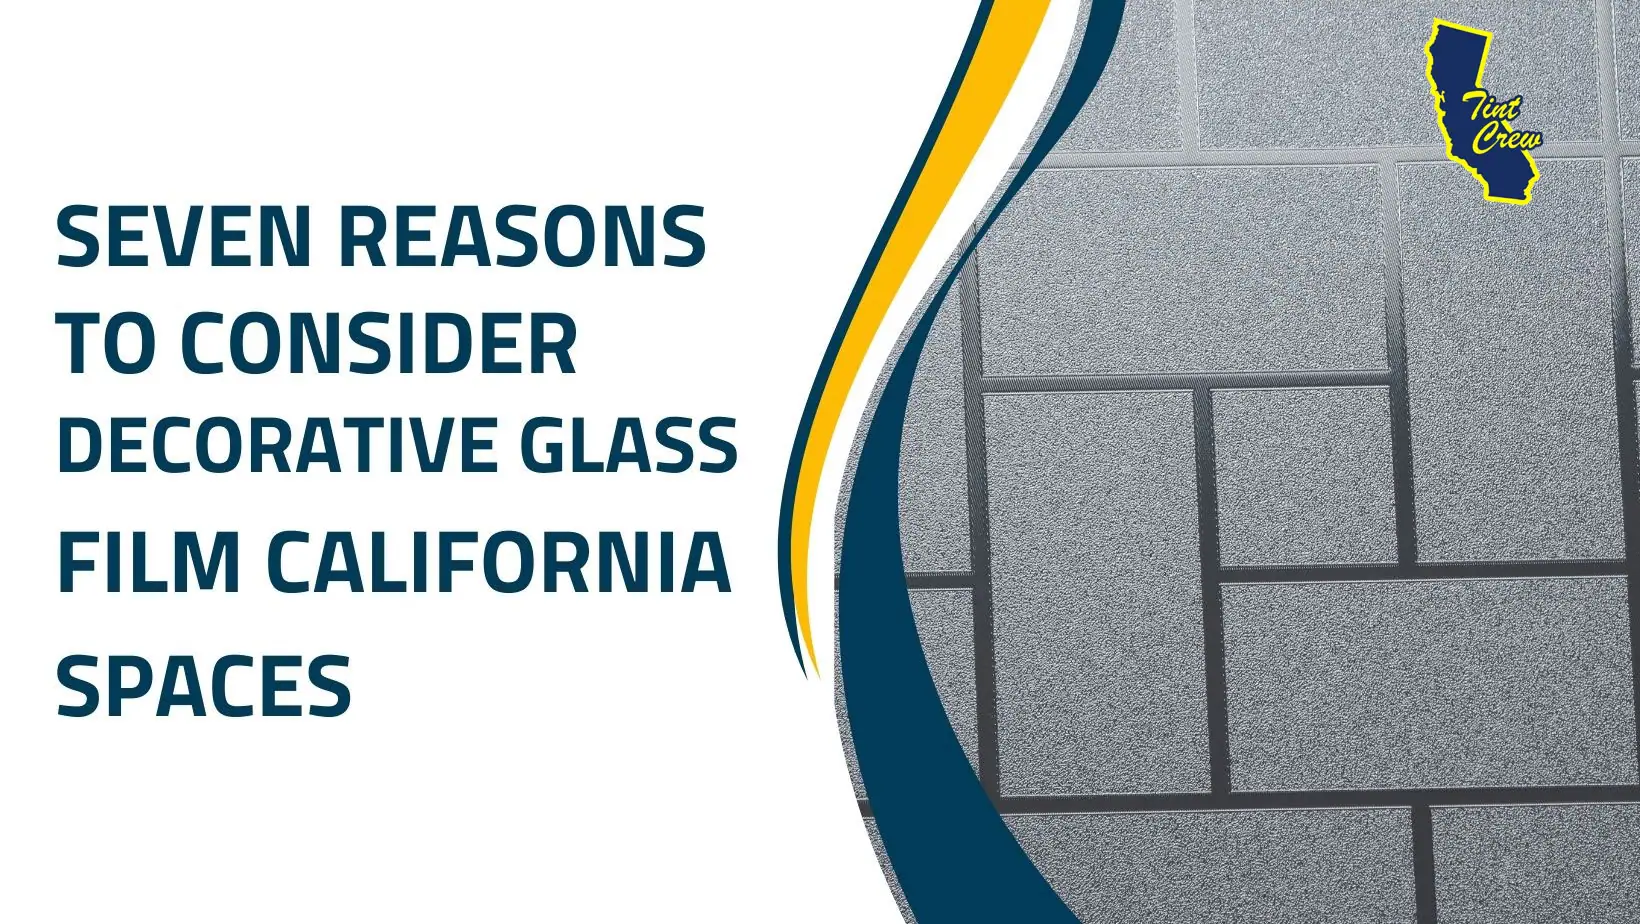 Seven Reasons to Consider Decorative Glass Film California Spaces